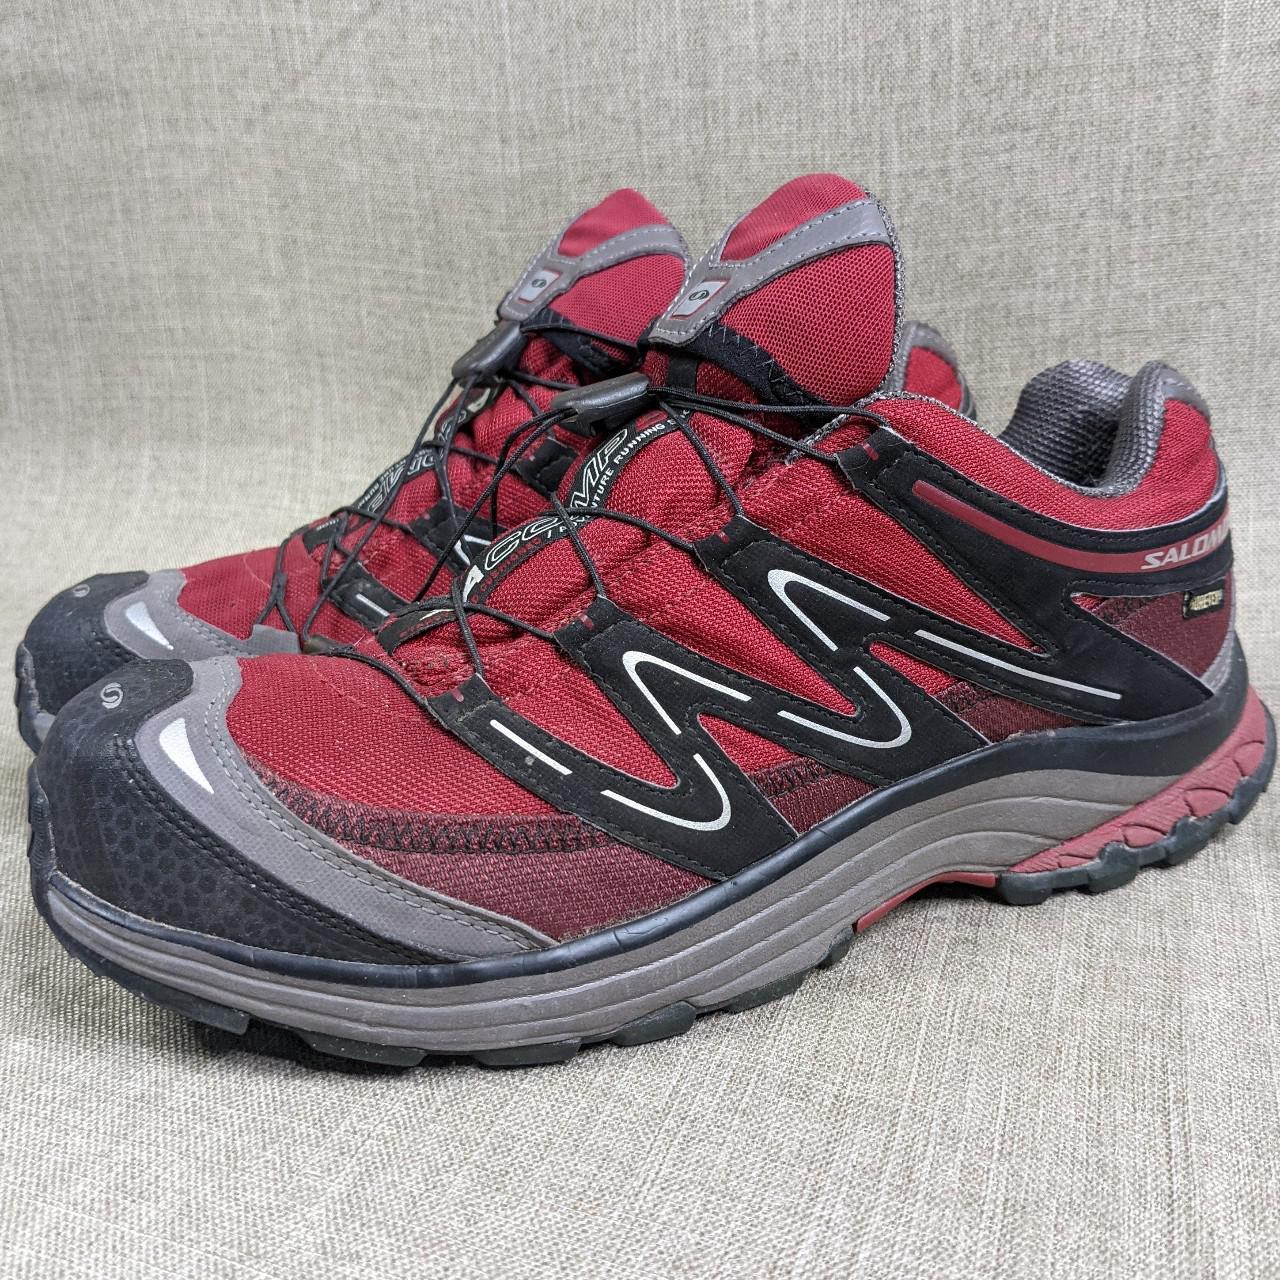 Product Image 1 - Salomon chunky sneakers. Women's size